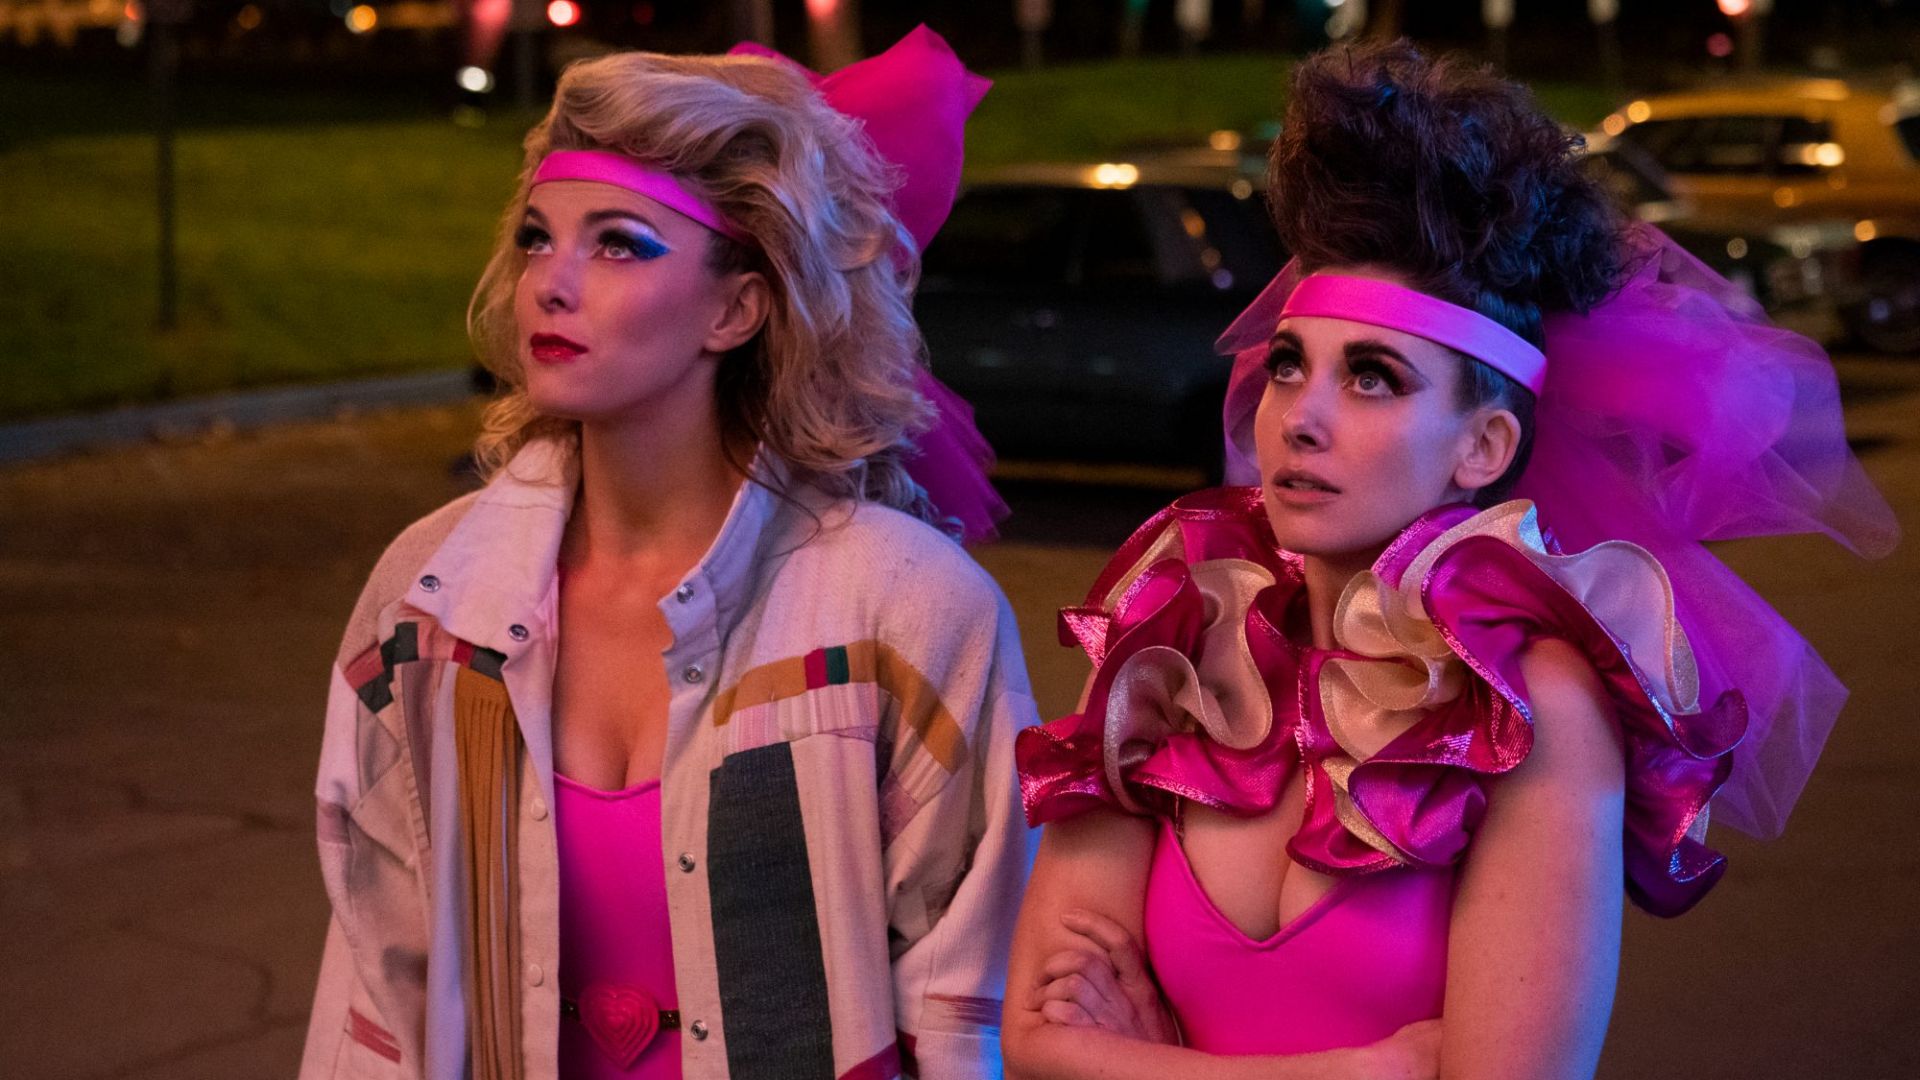 GLOW' Season 4: Kate Nash Shares Images From Cancelled Series